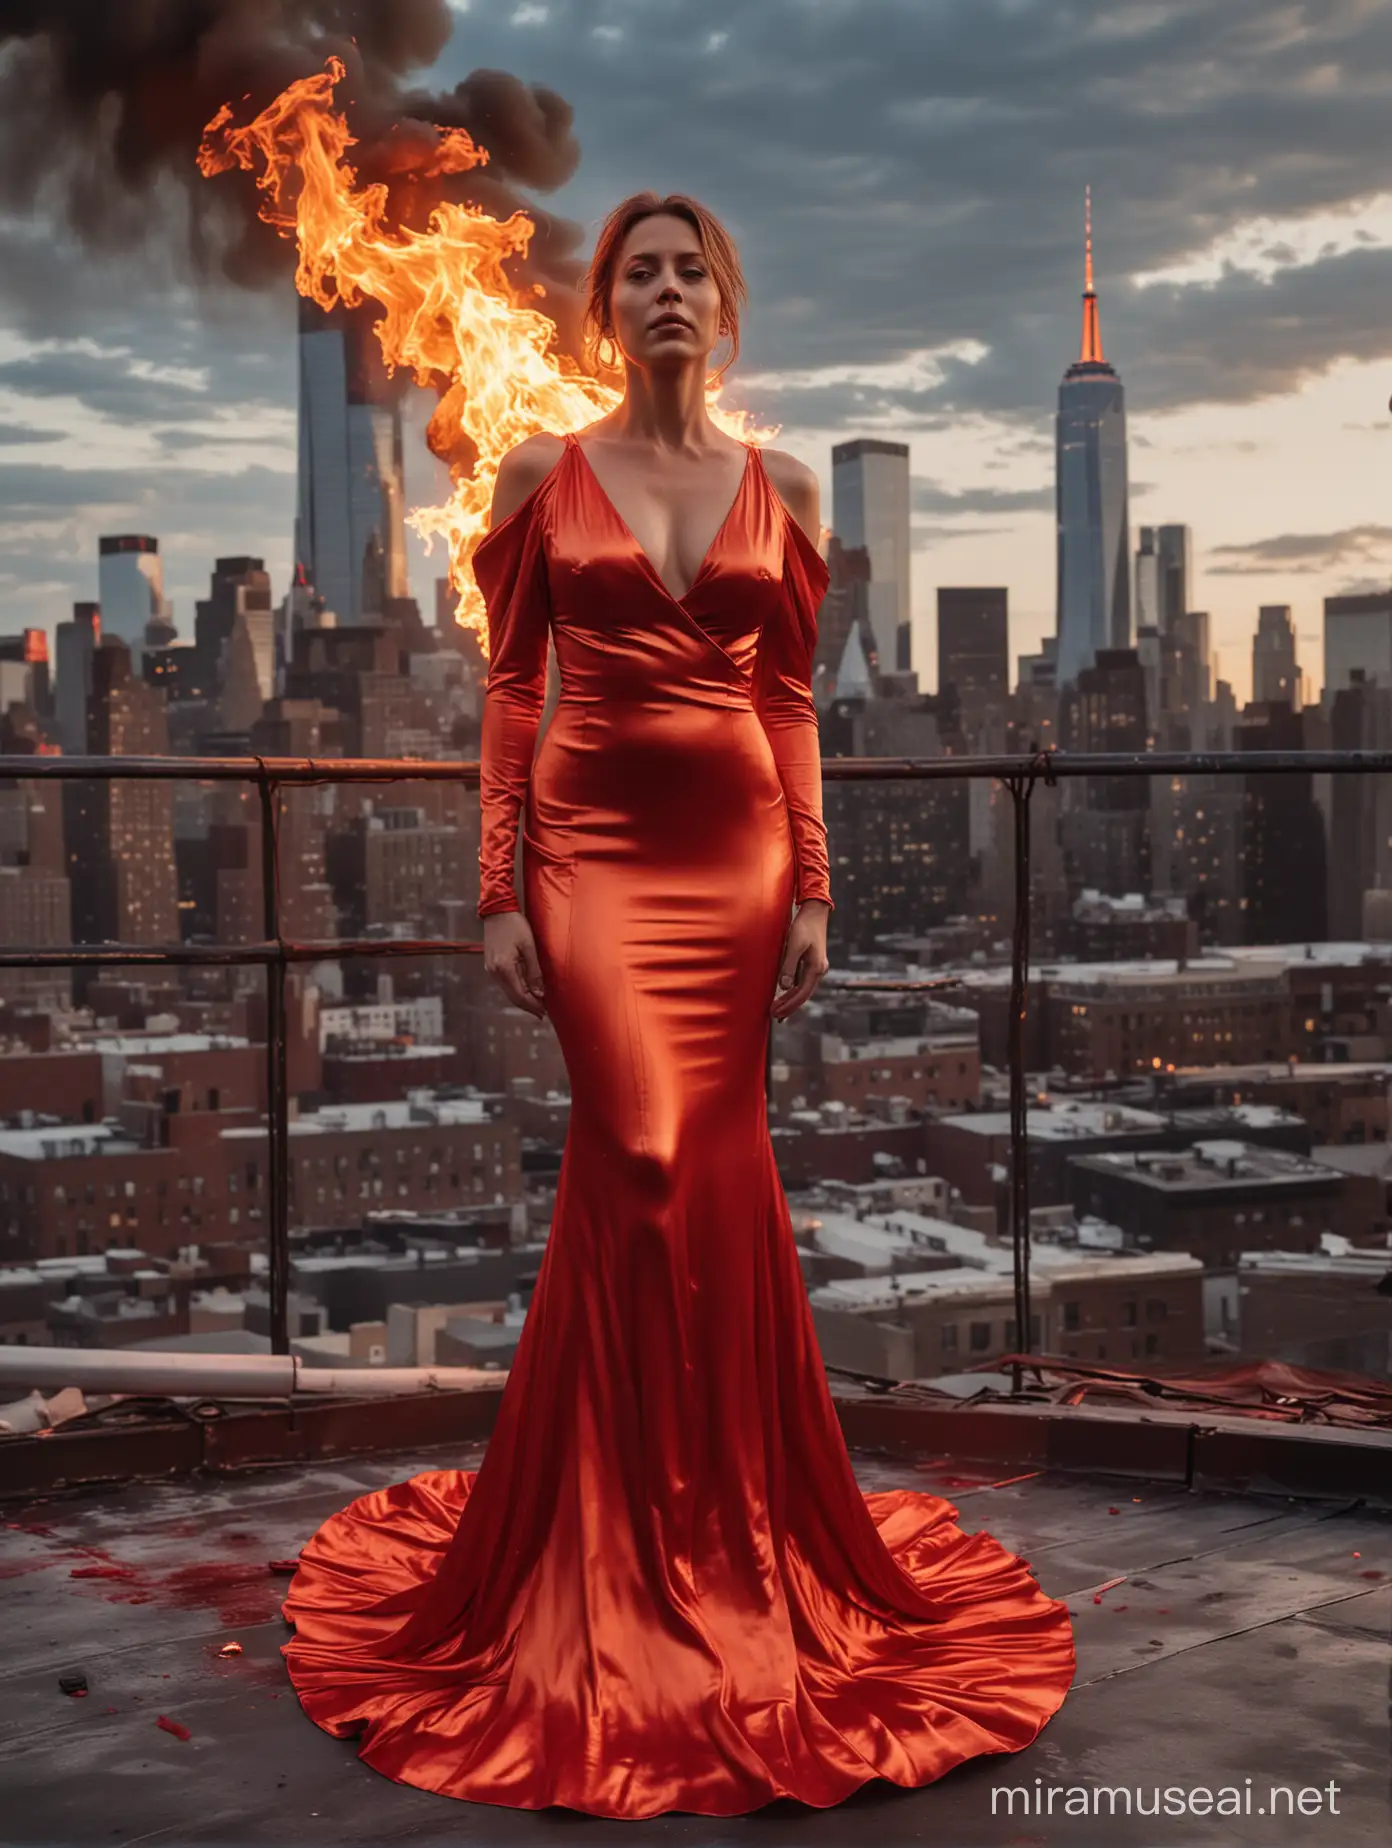 Powerful Woman in Flaming Dress on New York Rooftop